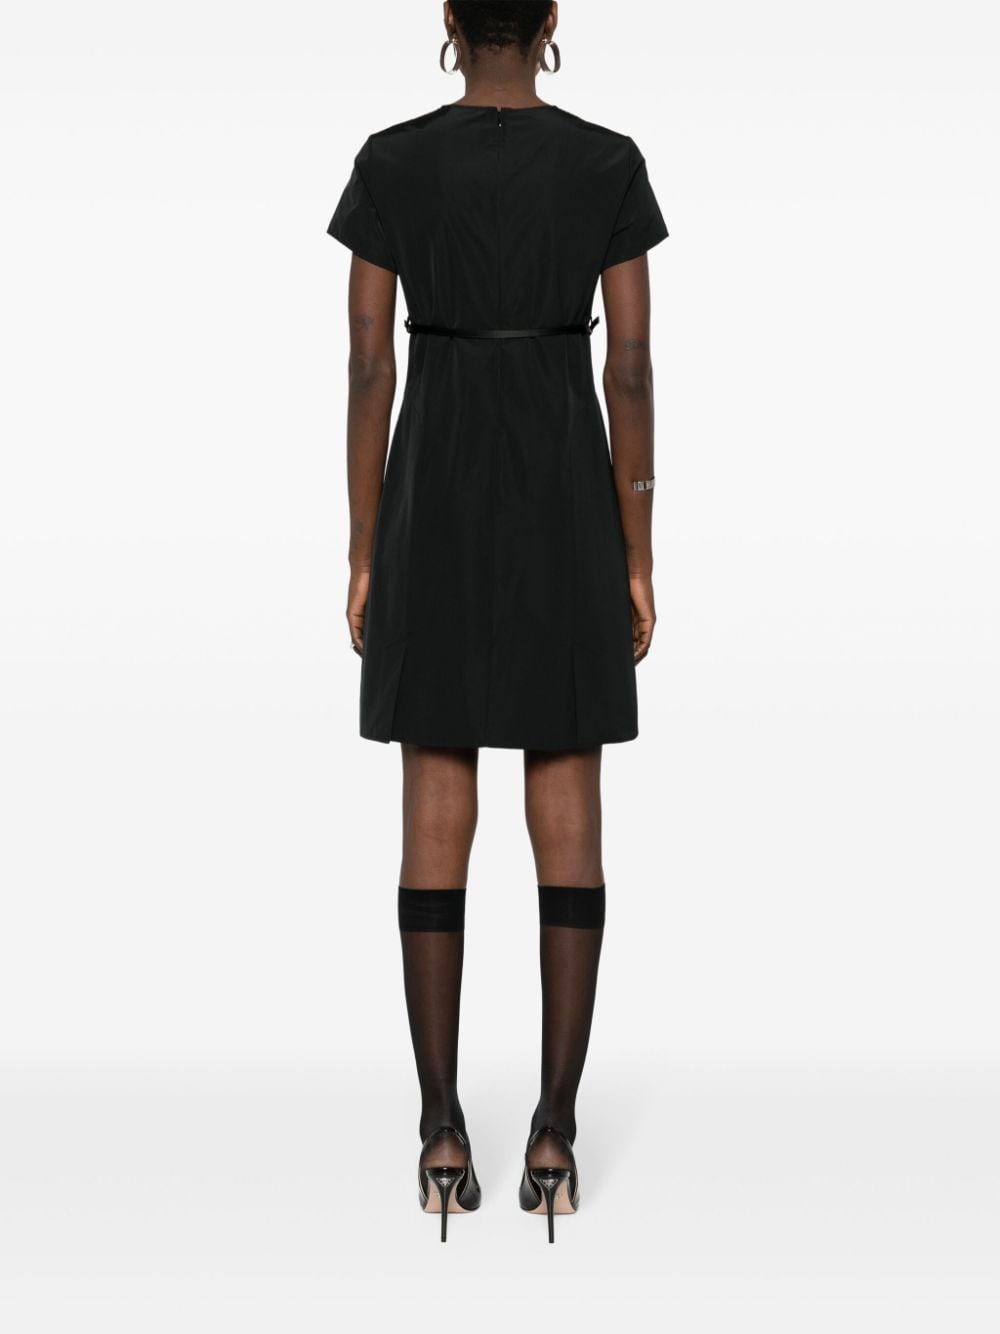 Shop Givenchy Black Cotton Blend Mini Dress With Flared Skirt And Adjustable Belt For Women